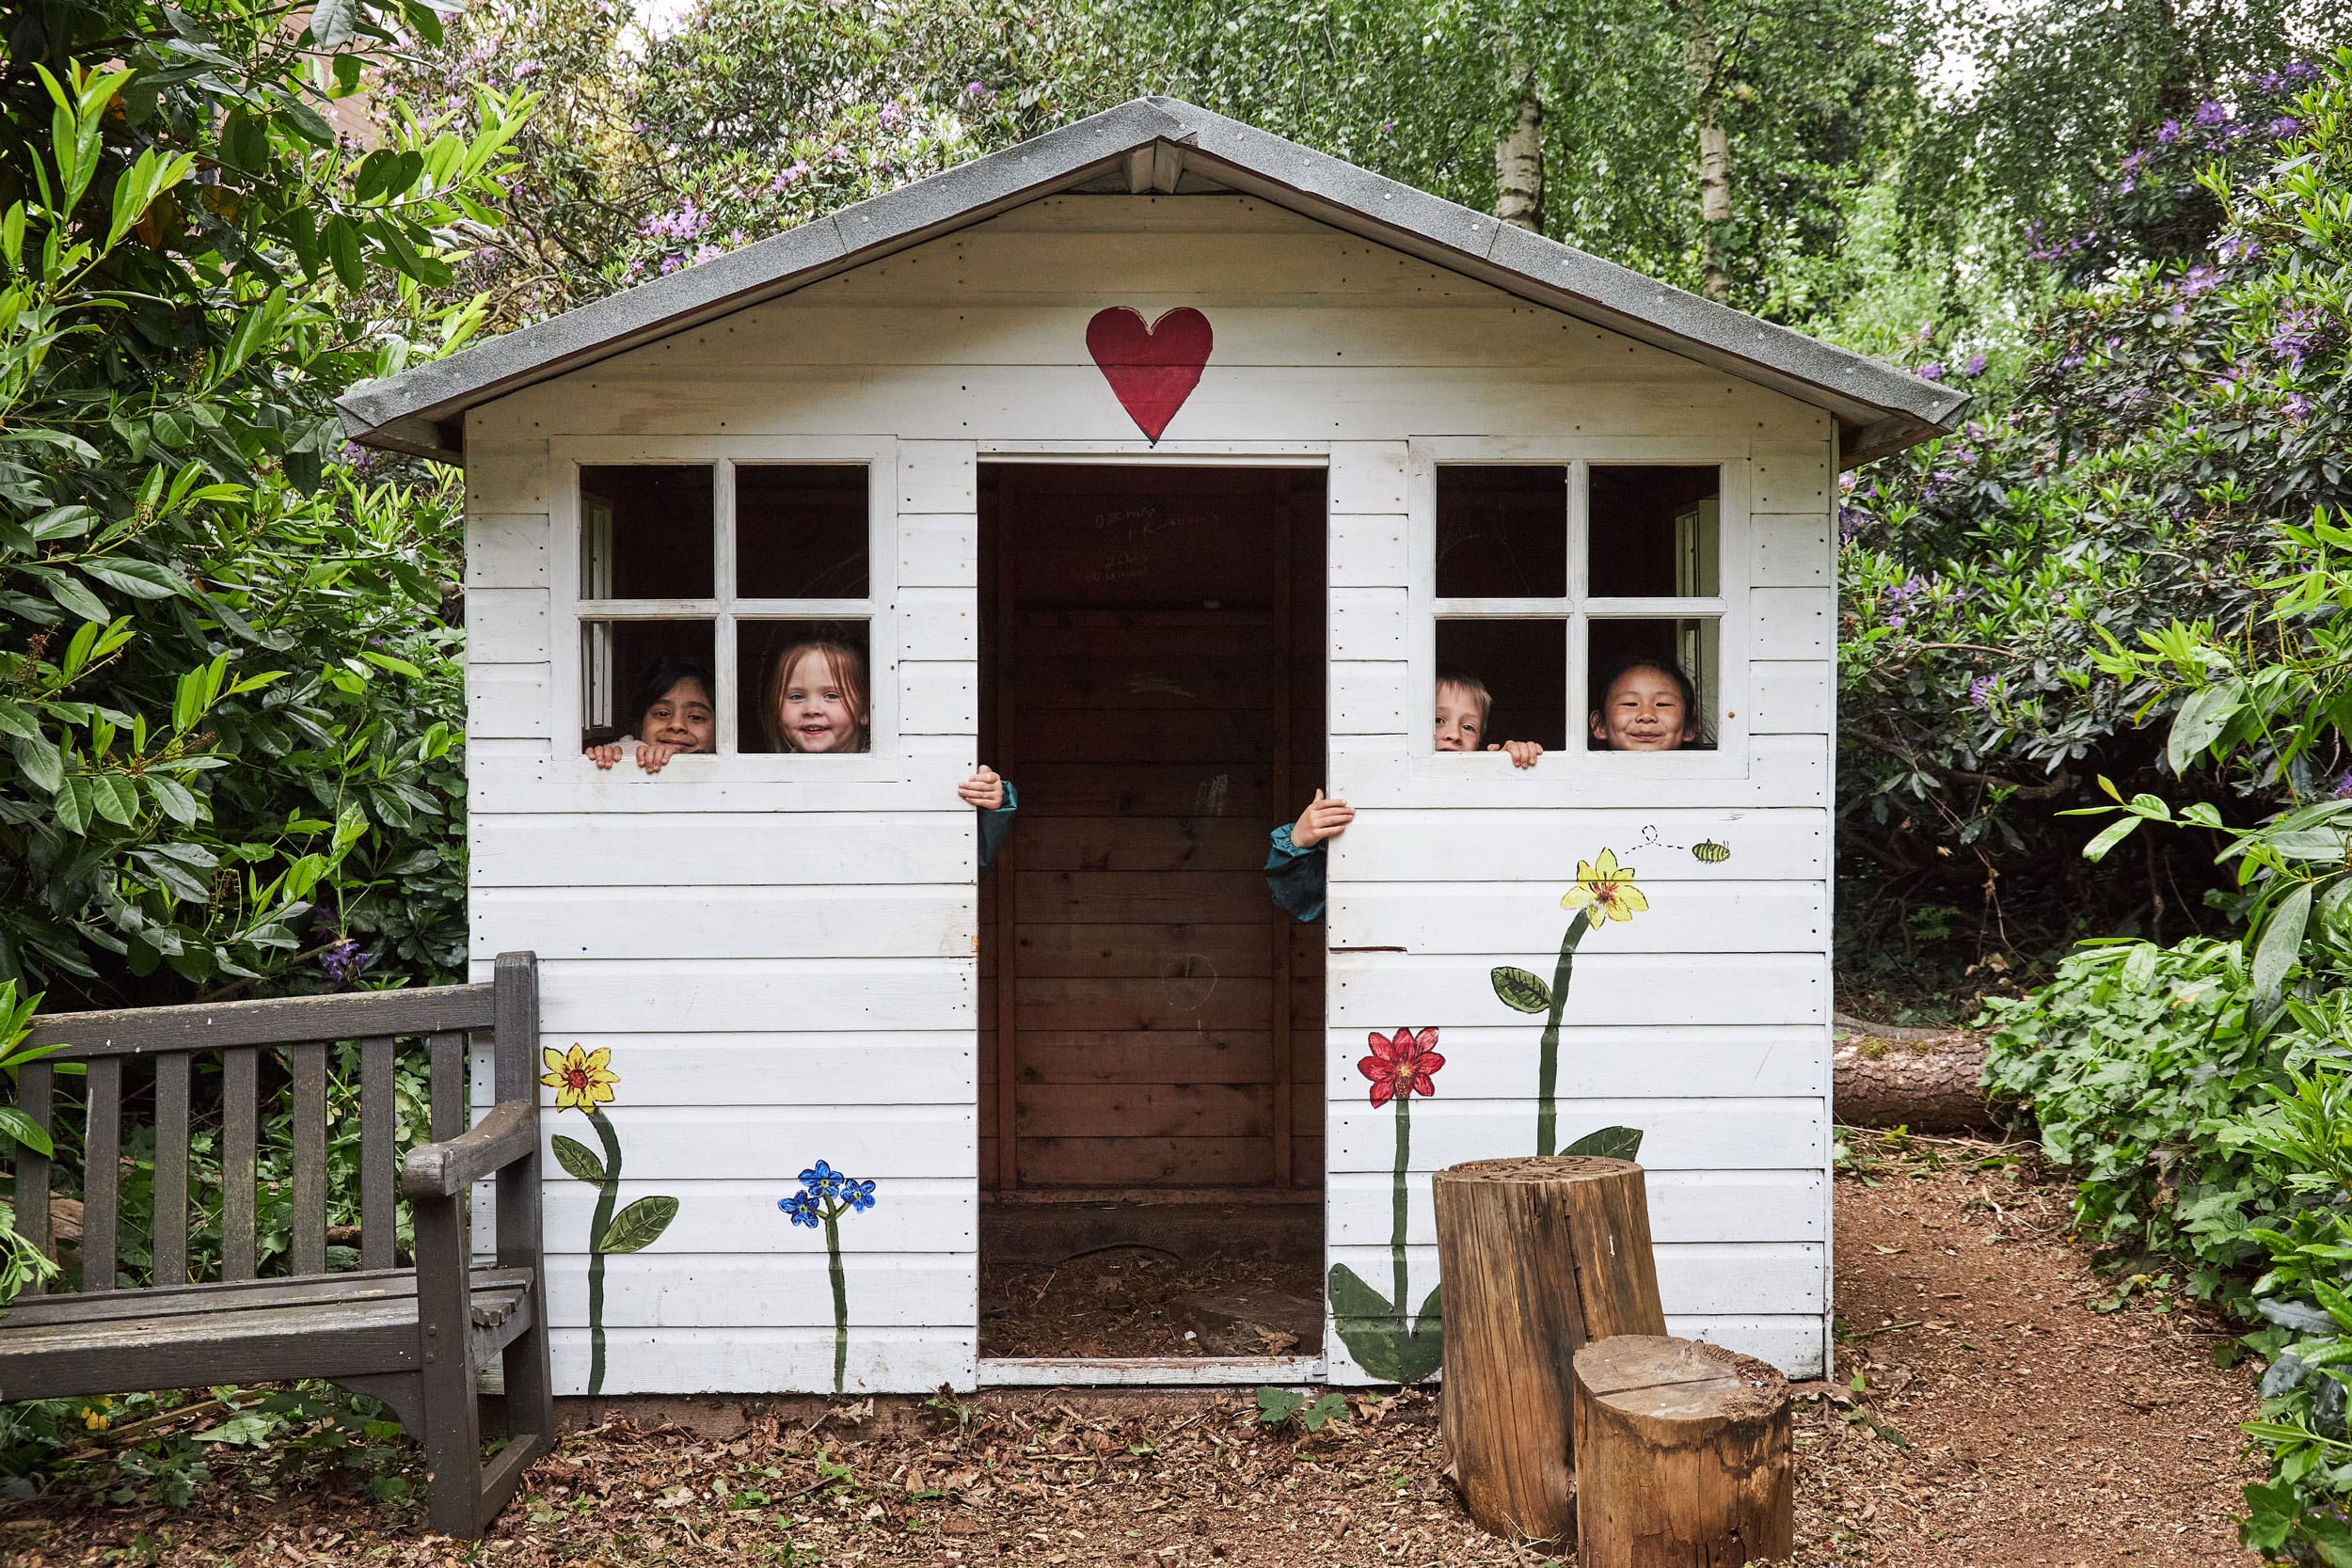 Four children looking through the windows of the forest cottage in Forest School.